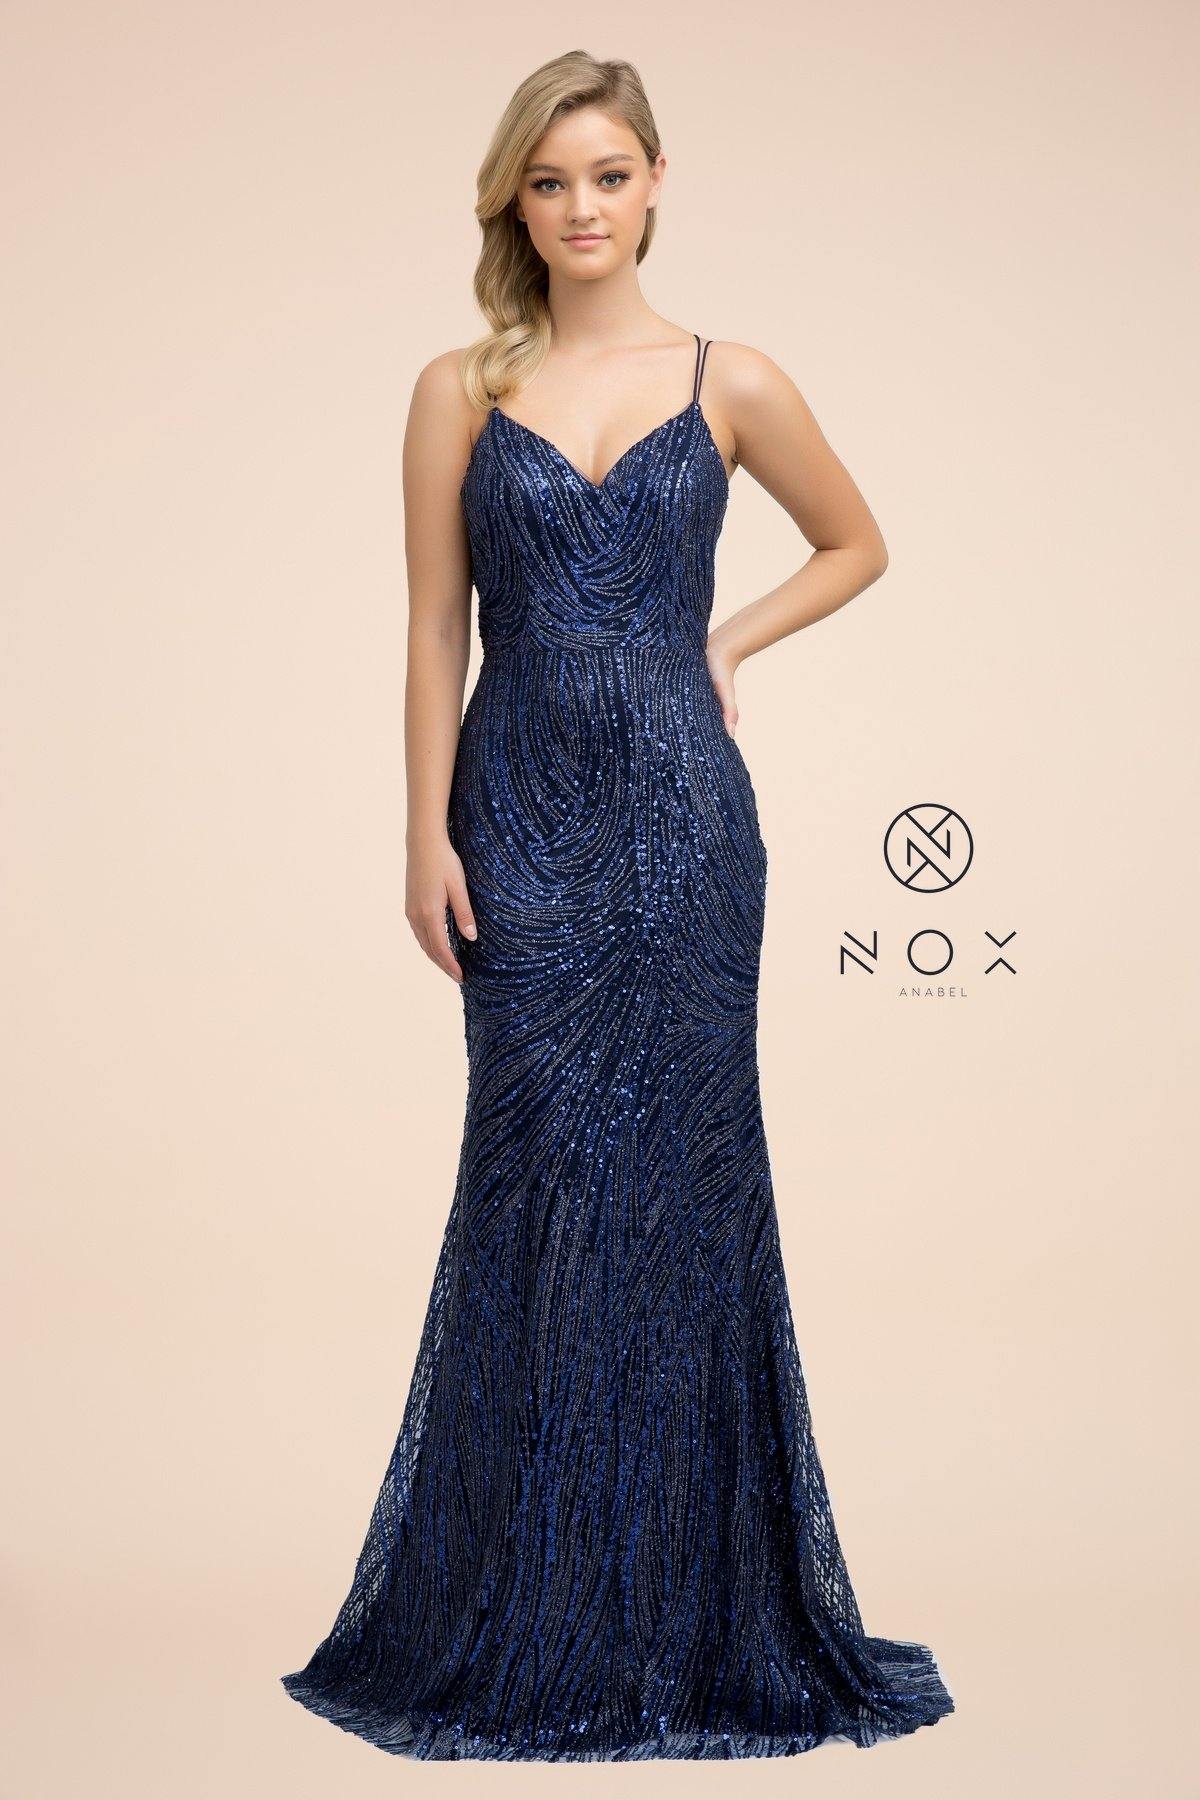 Long Glitter Prom Dress Evening Gown - The Dress Outlet Nox Anabel